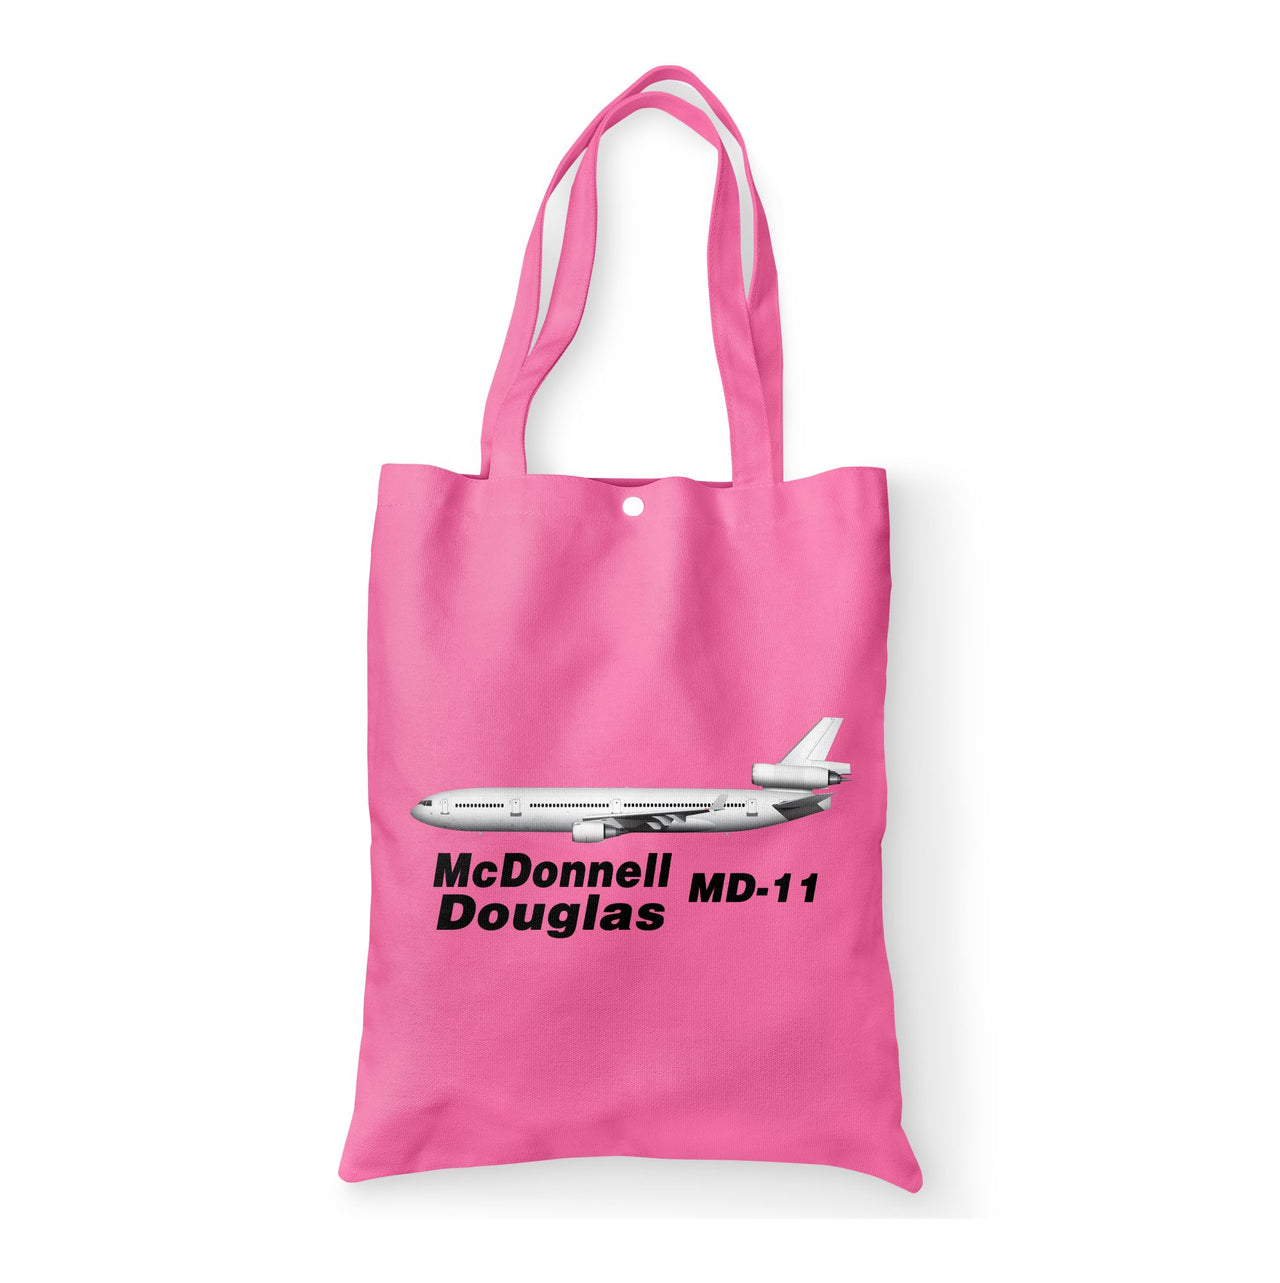 The McDonnell Douglas MD-11 Designed Tote Bags